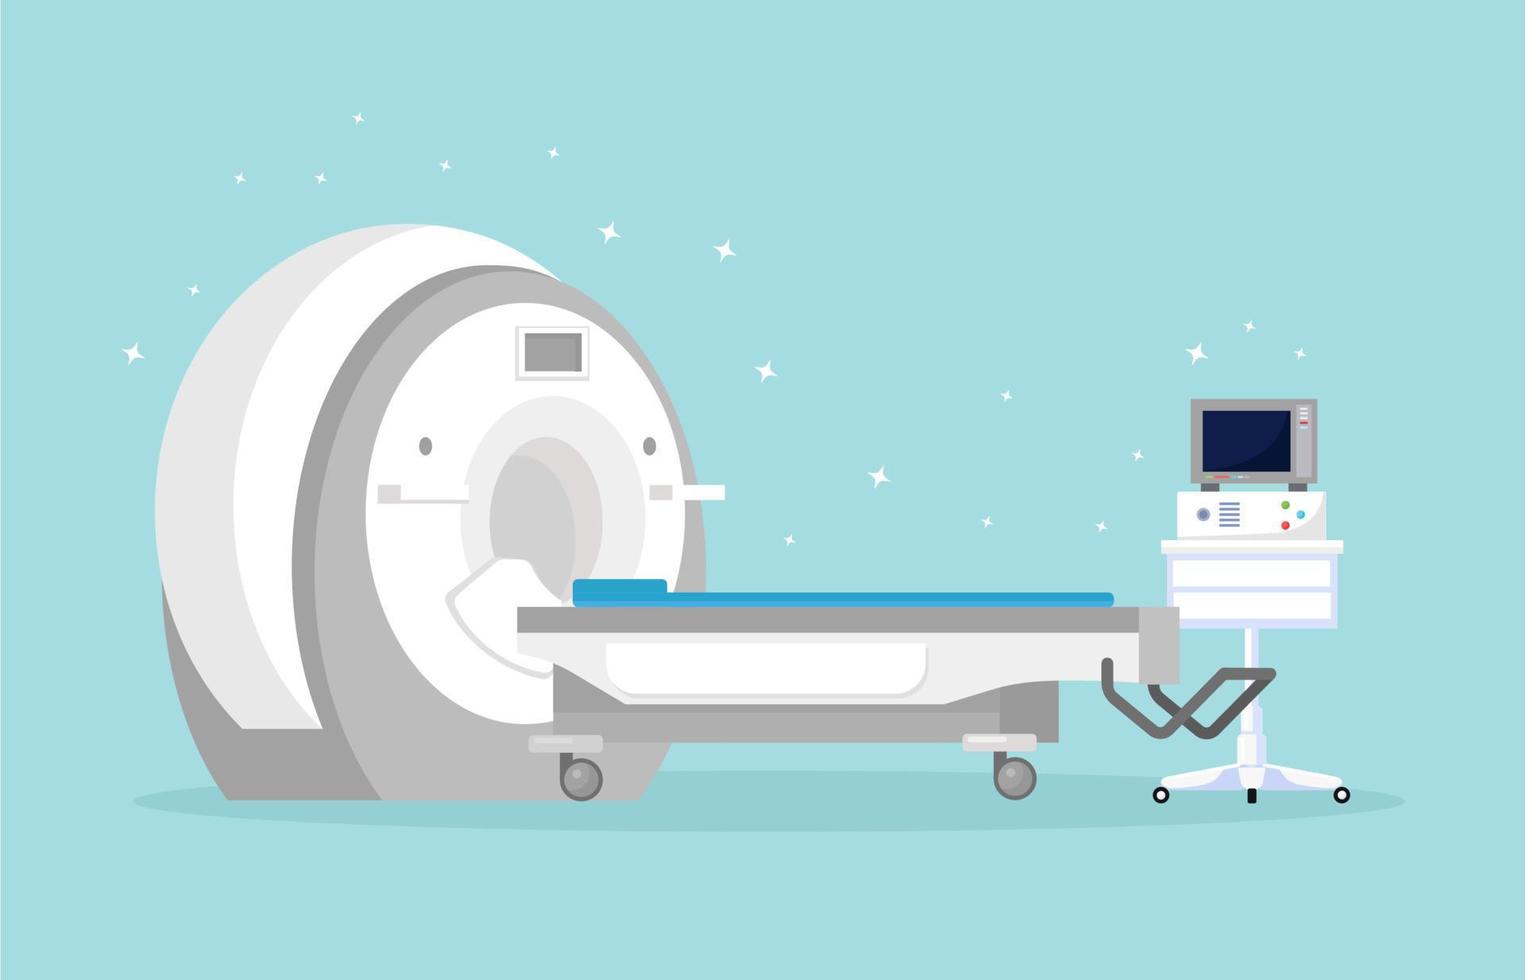 Magnetic Resonance Imaging Technology. Tomography, radiology, xray machine for examination for oncology disease, brain diagnostics. MRI machine with computer. Vector cartoon design